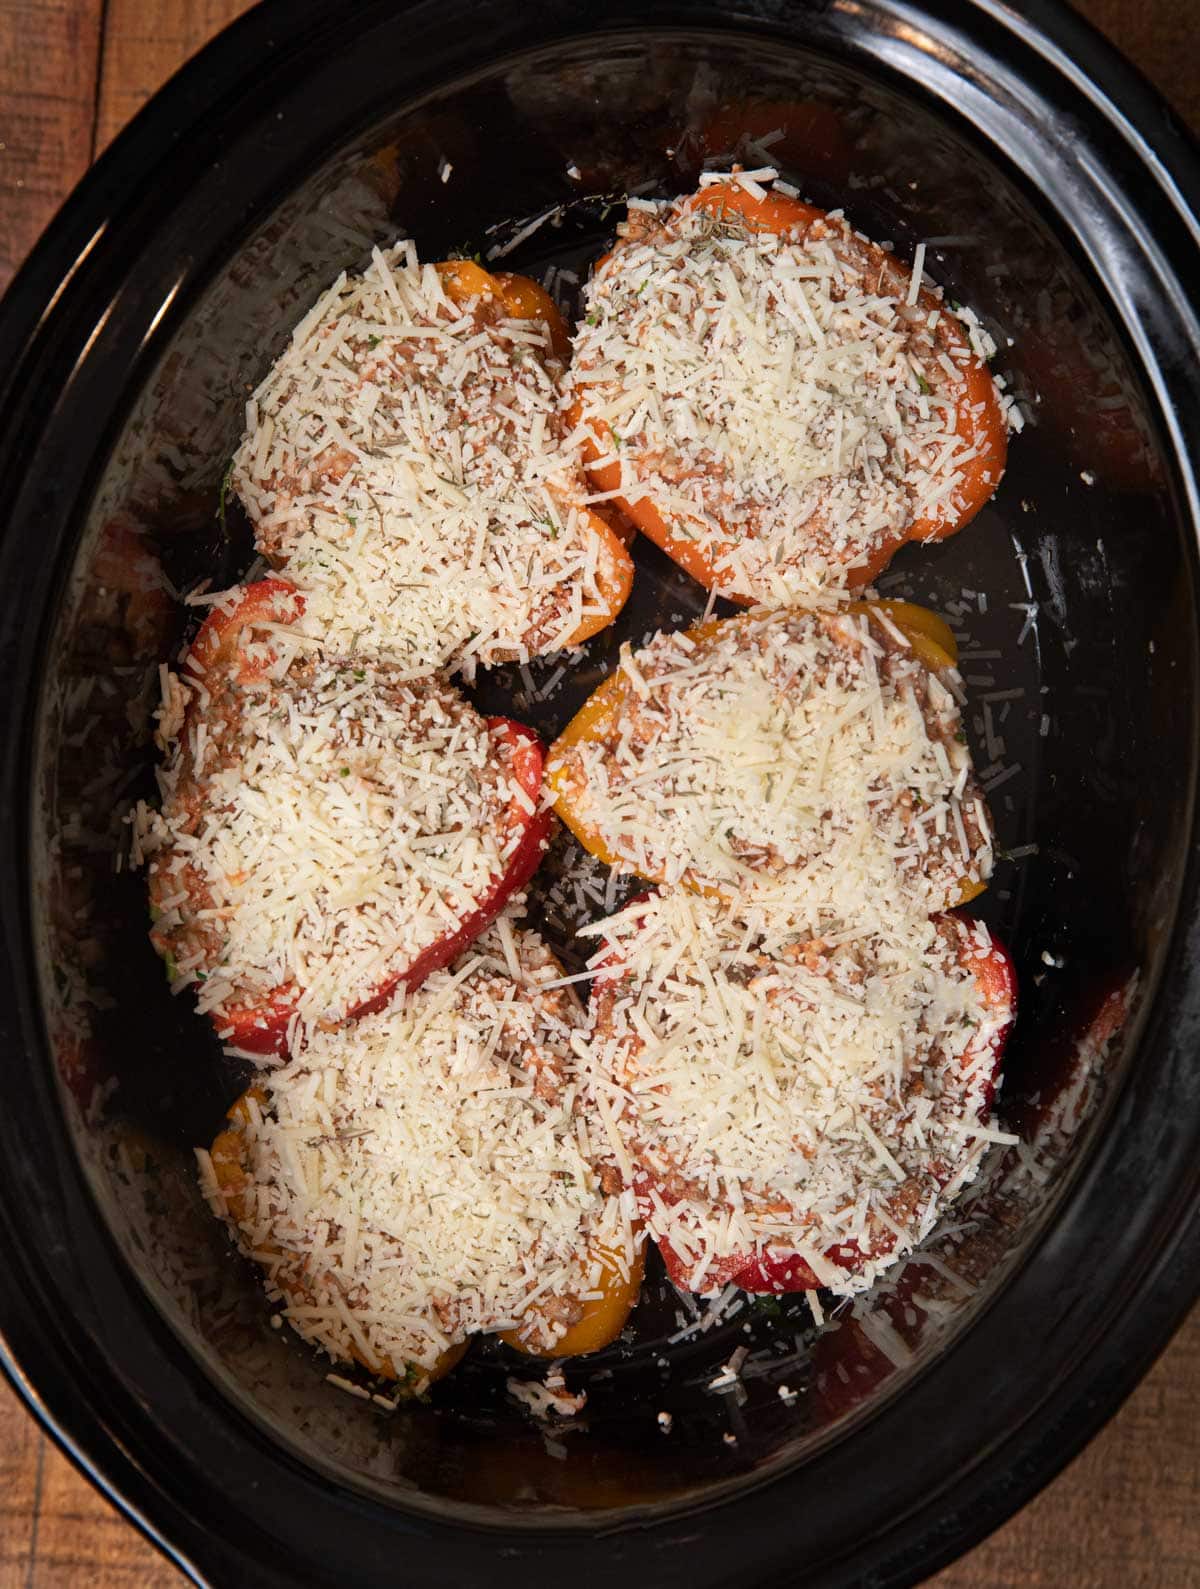 Slow Cooker Stuffed Bell Peppers in crockpot before cooking